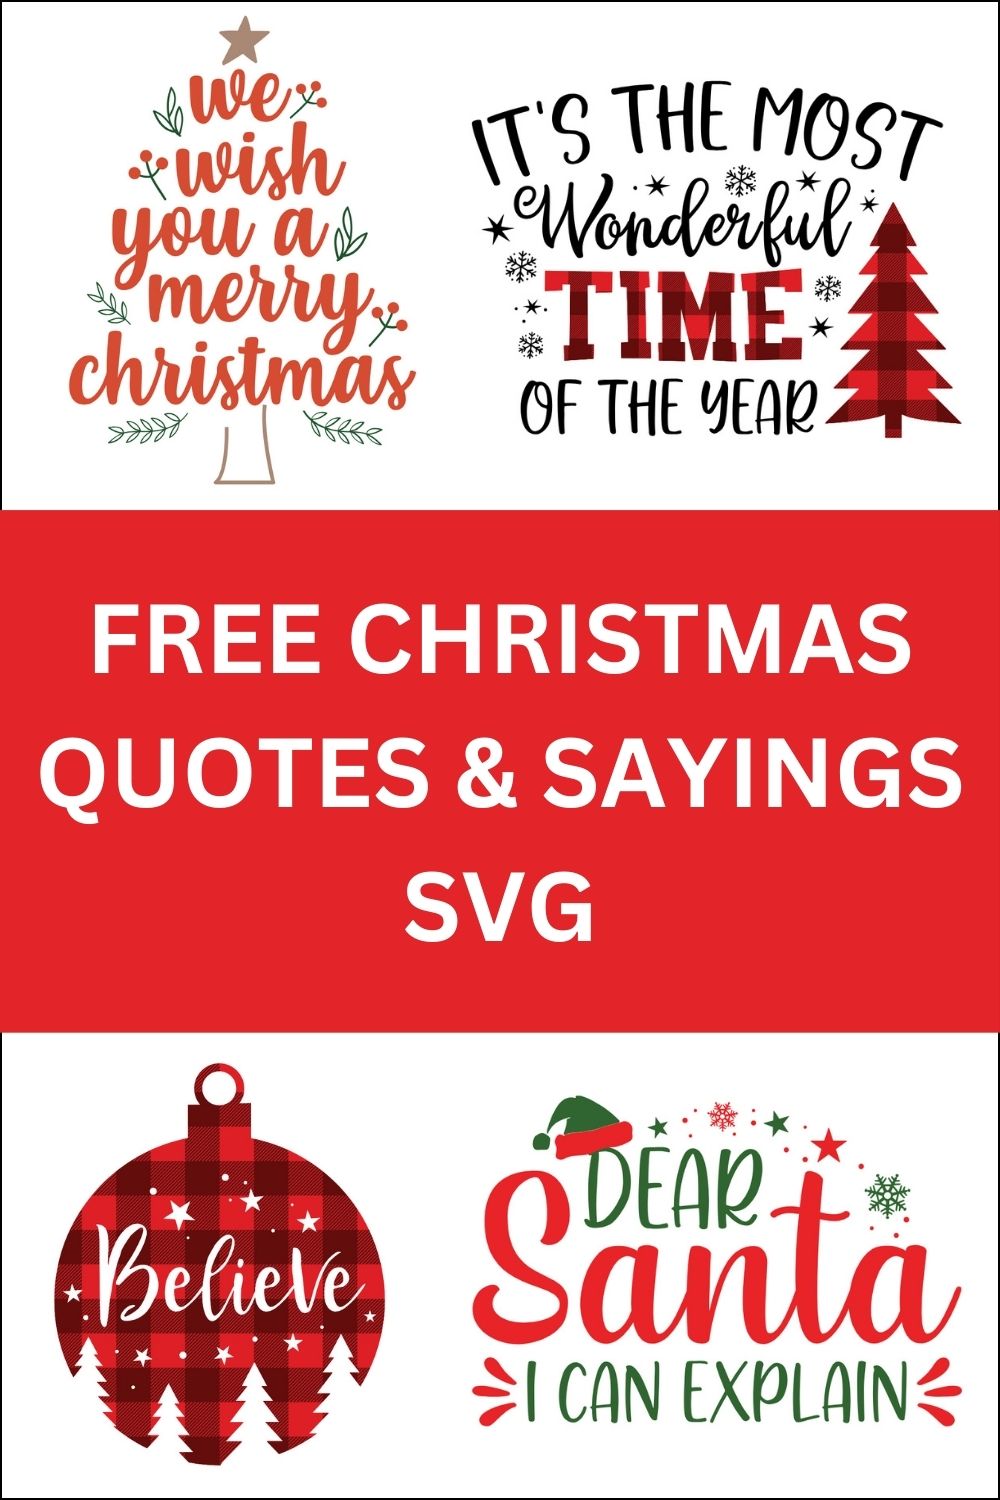 Christmas quotes, Christmas sayings, cricut designs, svg files, silhouette, winter, holidays, crafts, embroidery, bundle, cut files, vector, download, card stock, glowforge, Clip Art, Funny Christmas.